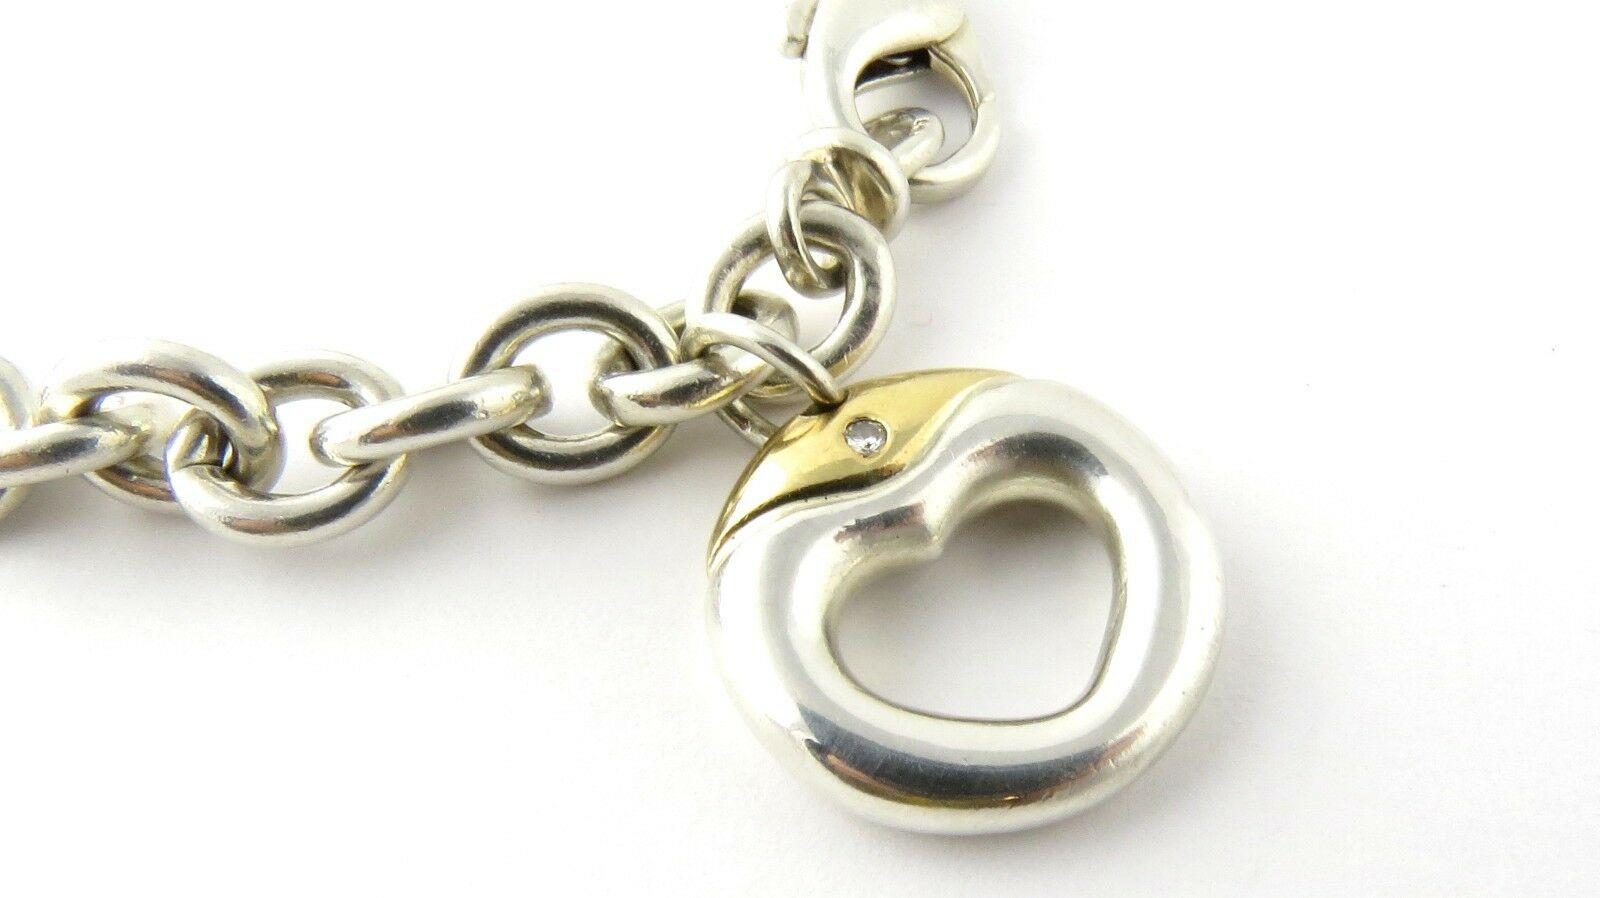 Movado Sterling Silver and 18K Yellow Gold Diamond Heart Link Charm Bracelet

This authentic Movado charm bracelet is approx. 7.75